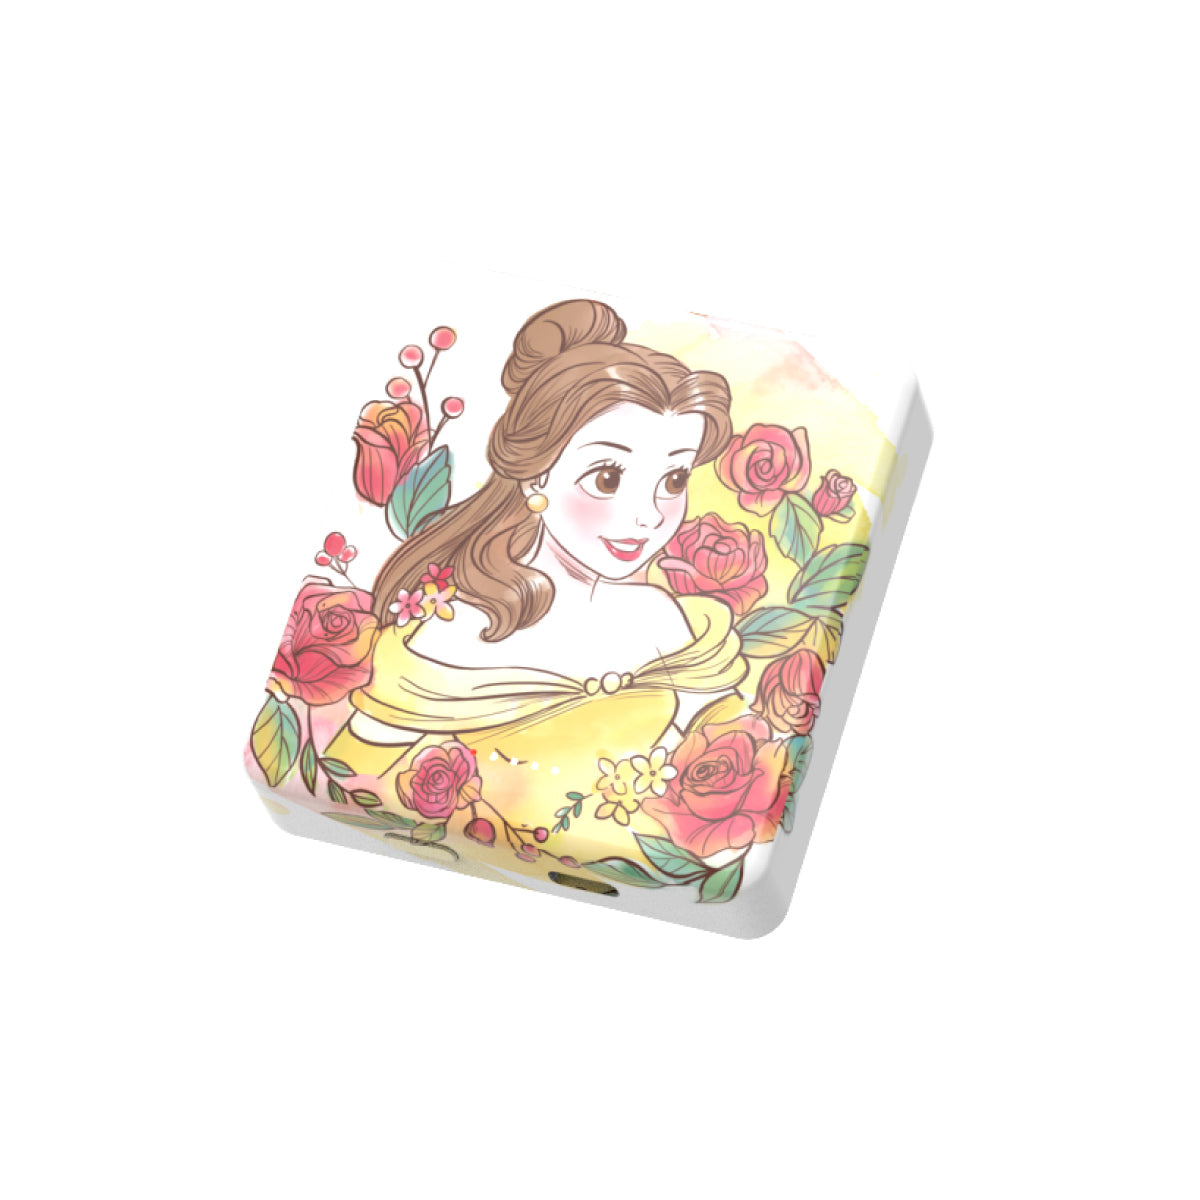 【LIMITED EDITION】Disney Magnetic Wireless Powerbank - Belle